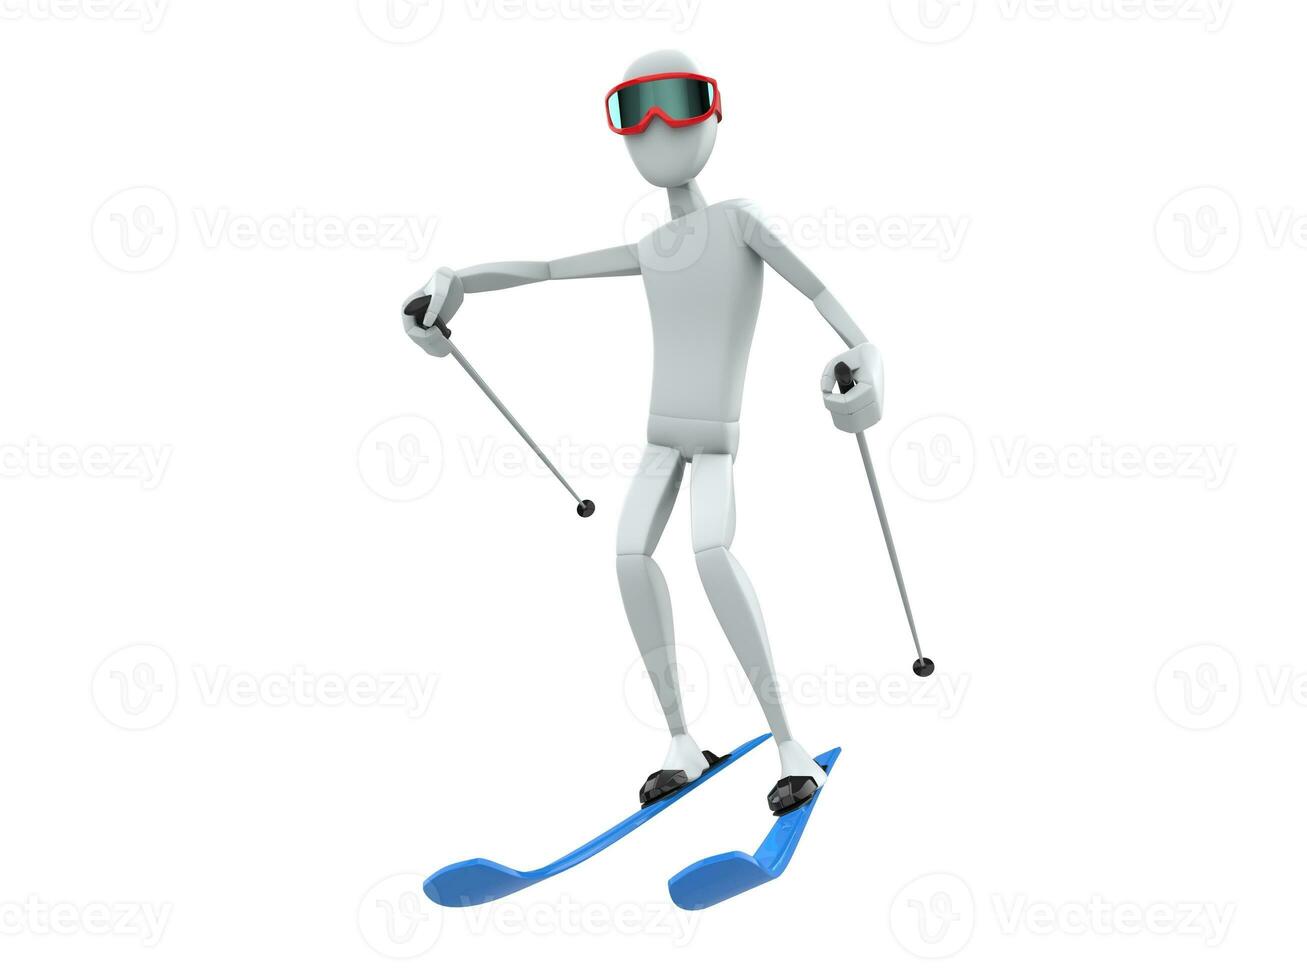 Ski template character with blue skis and red goggles photo